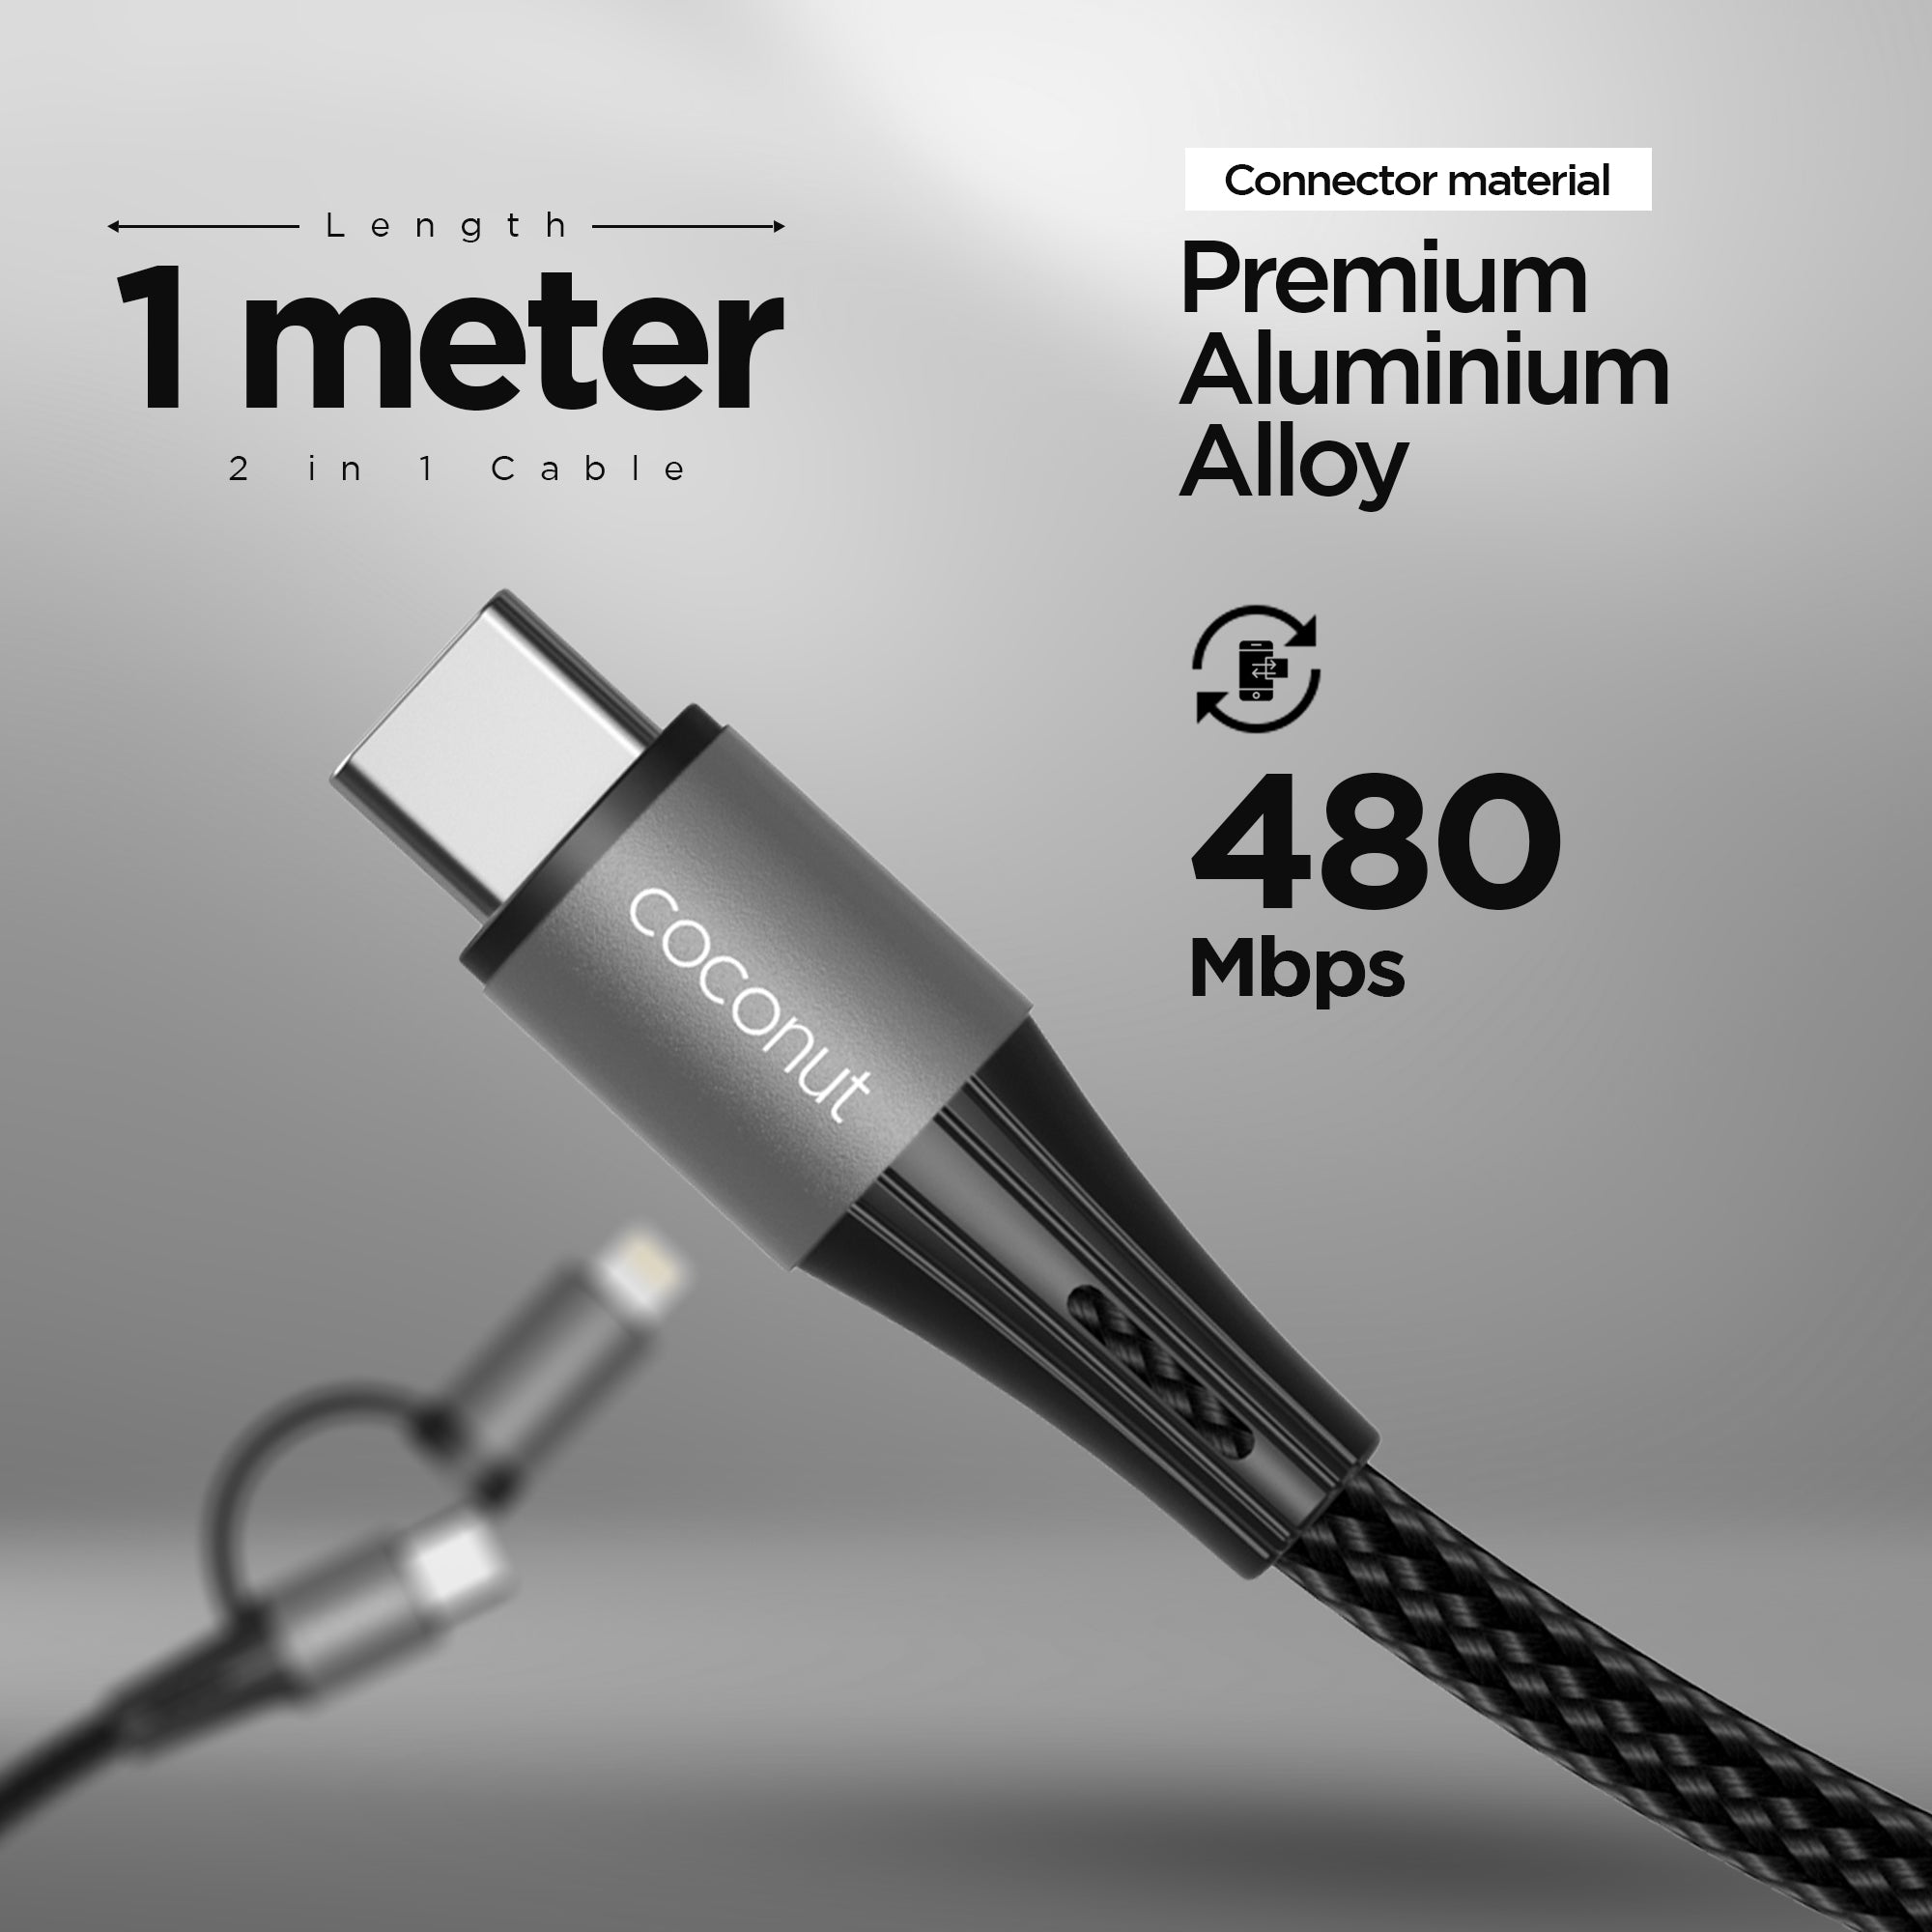 C19 2 in 1 Fast Charging Cable - 1M